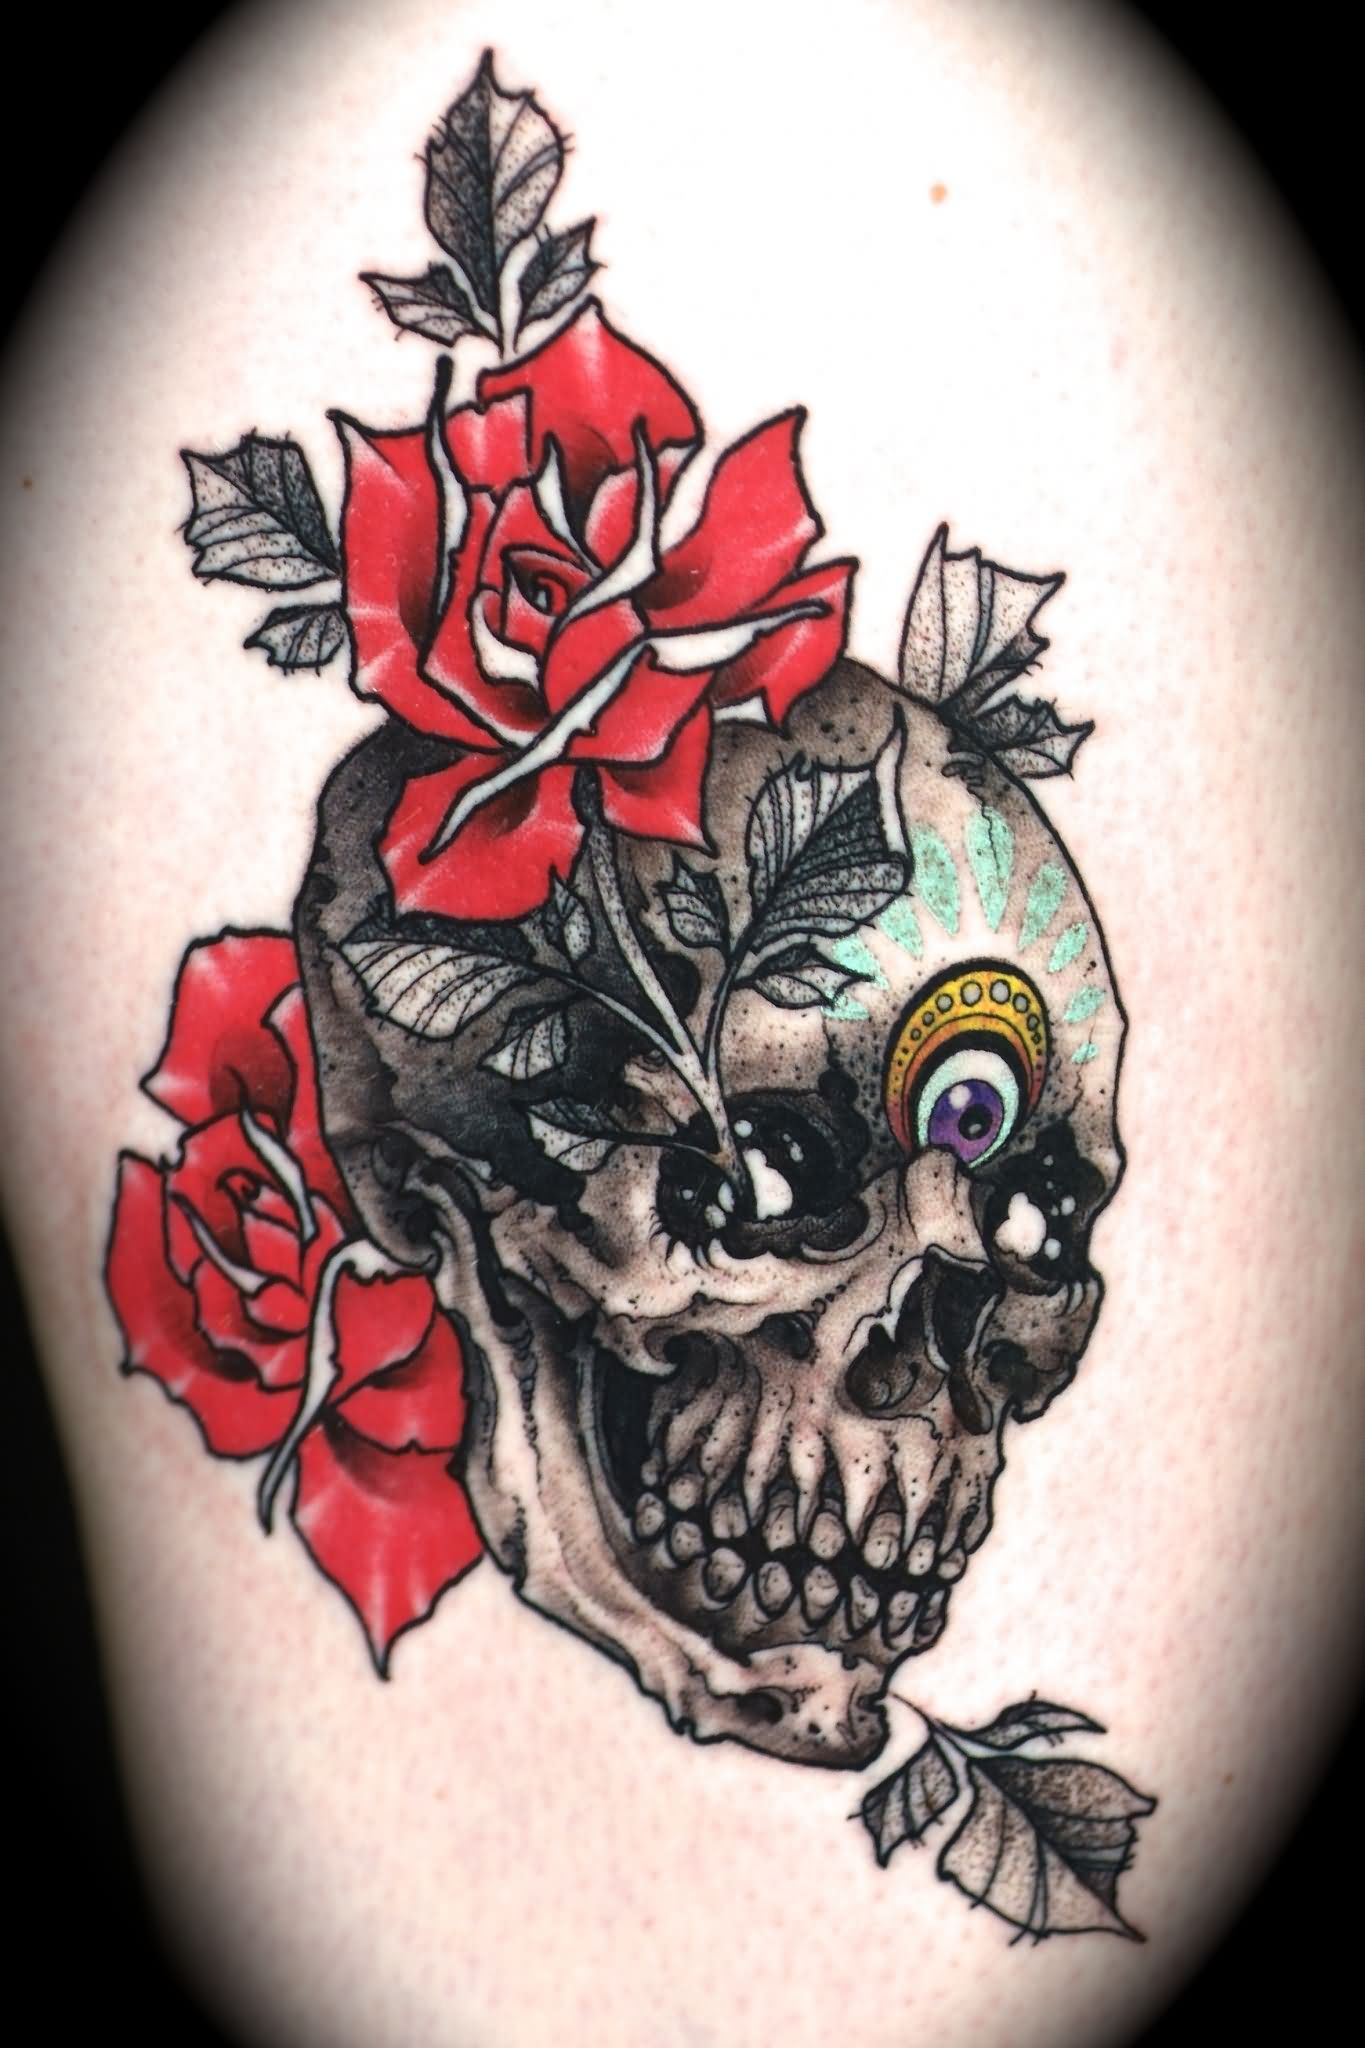 Skull With Rose Tattoo Design By Ben Merrell